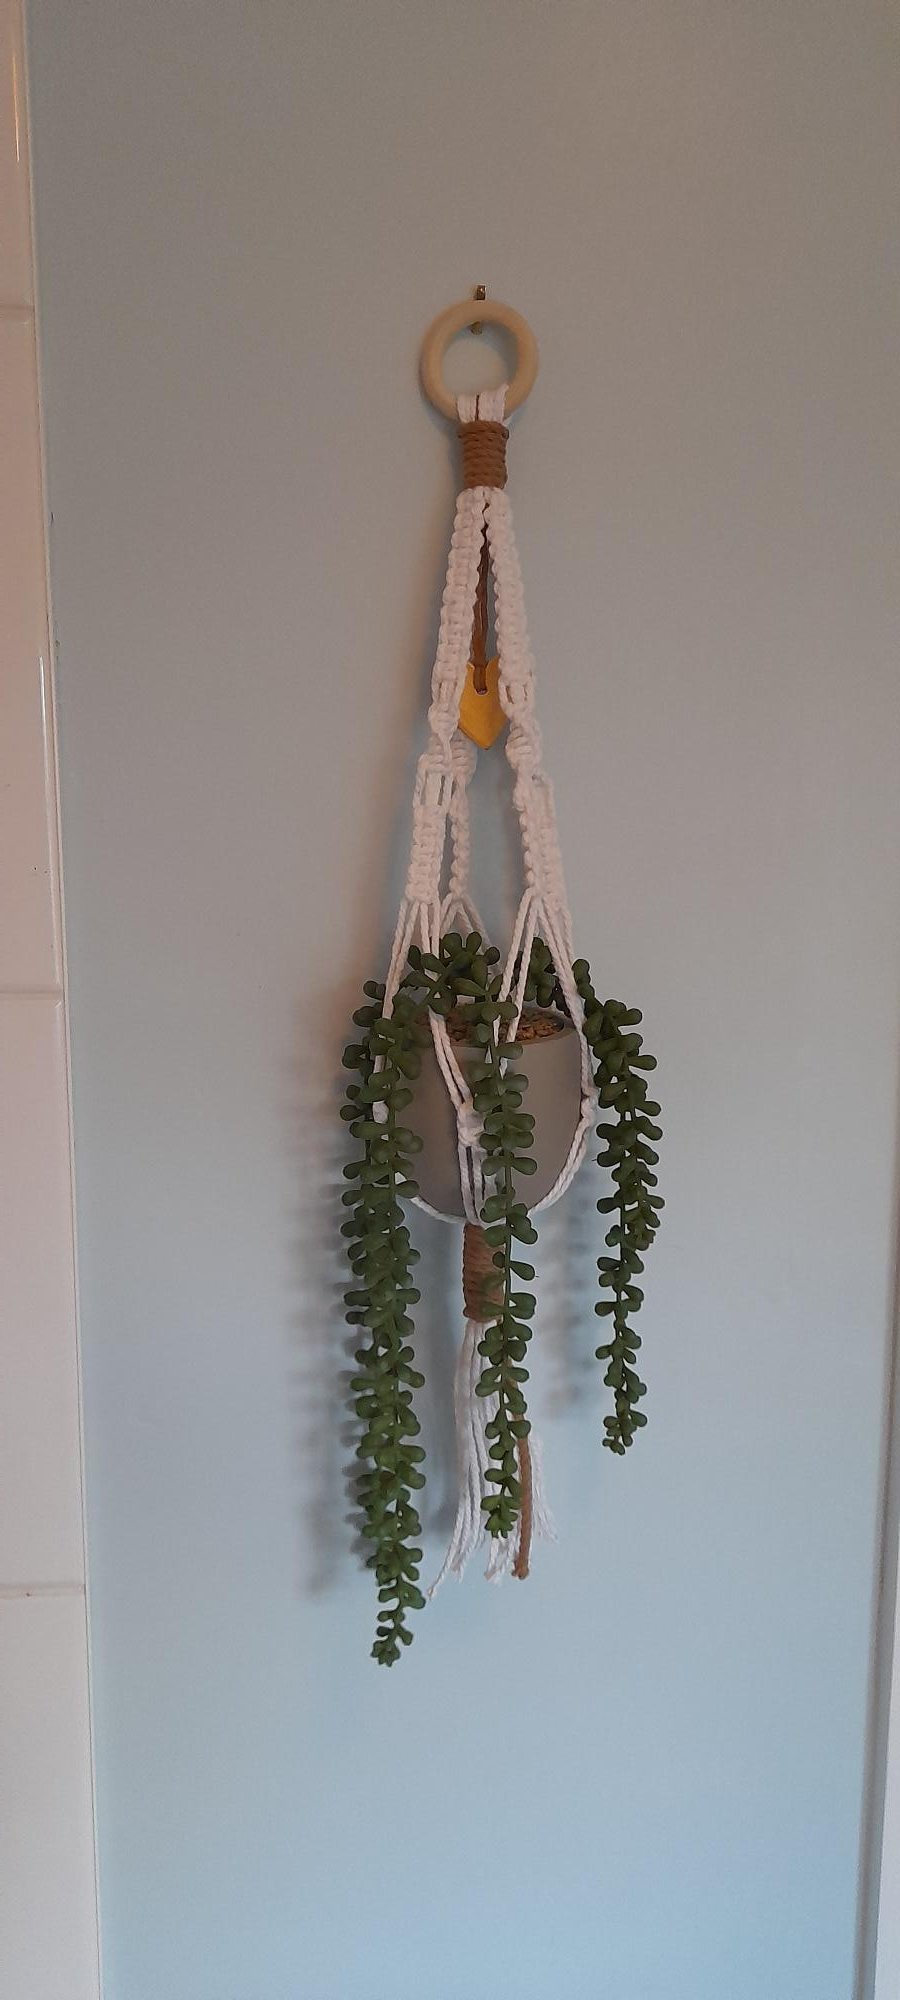 Handmade macrame hanging basket with Hanging Gold Air-Dry Clay Embellishment